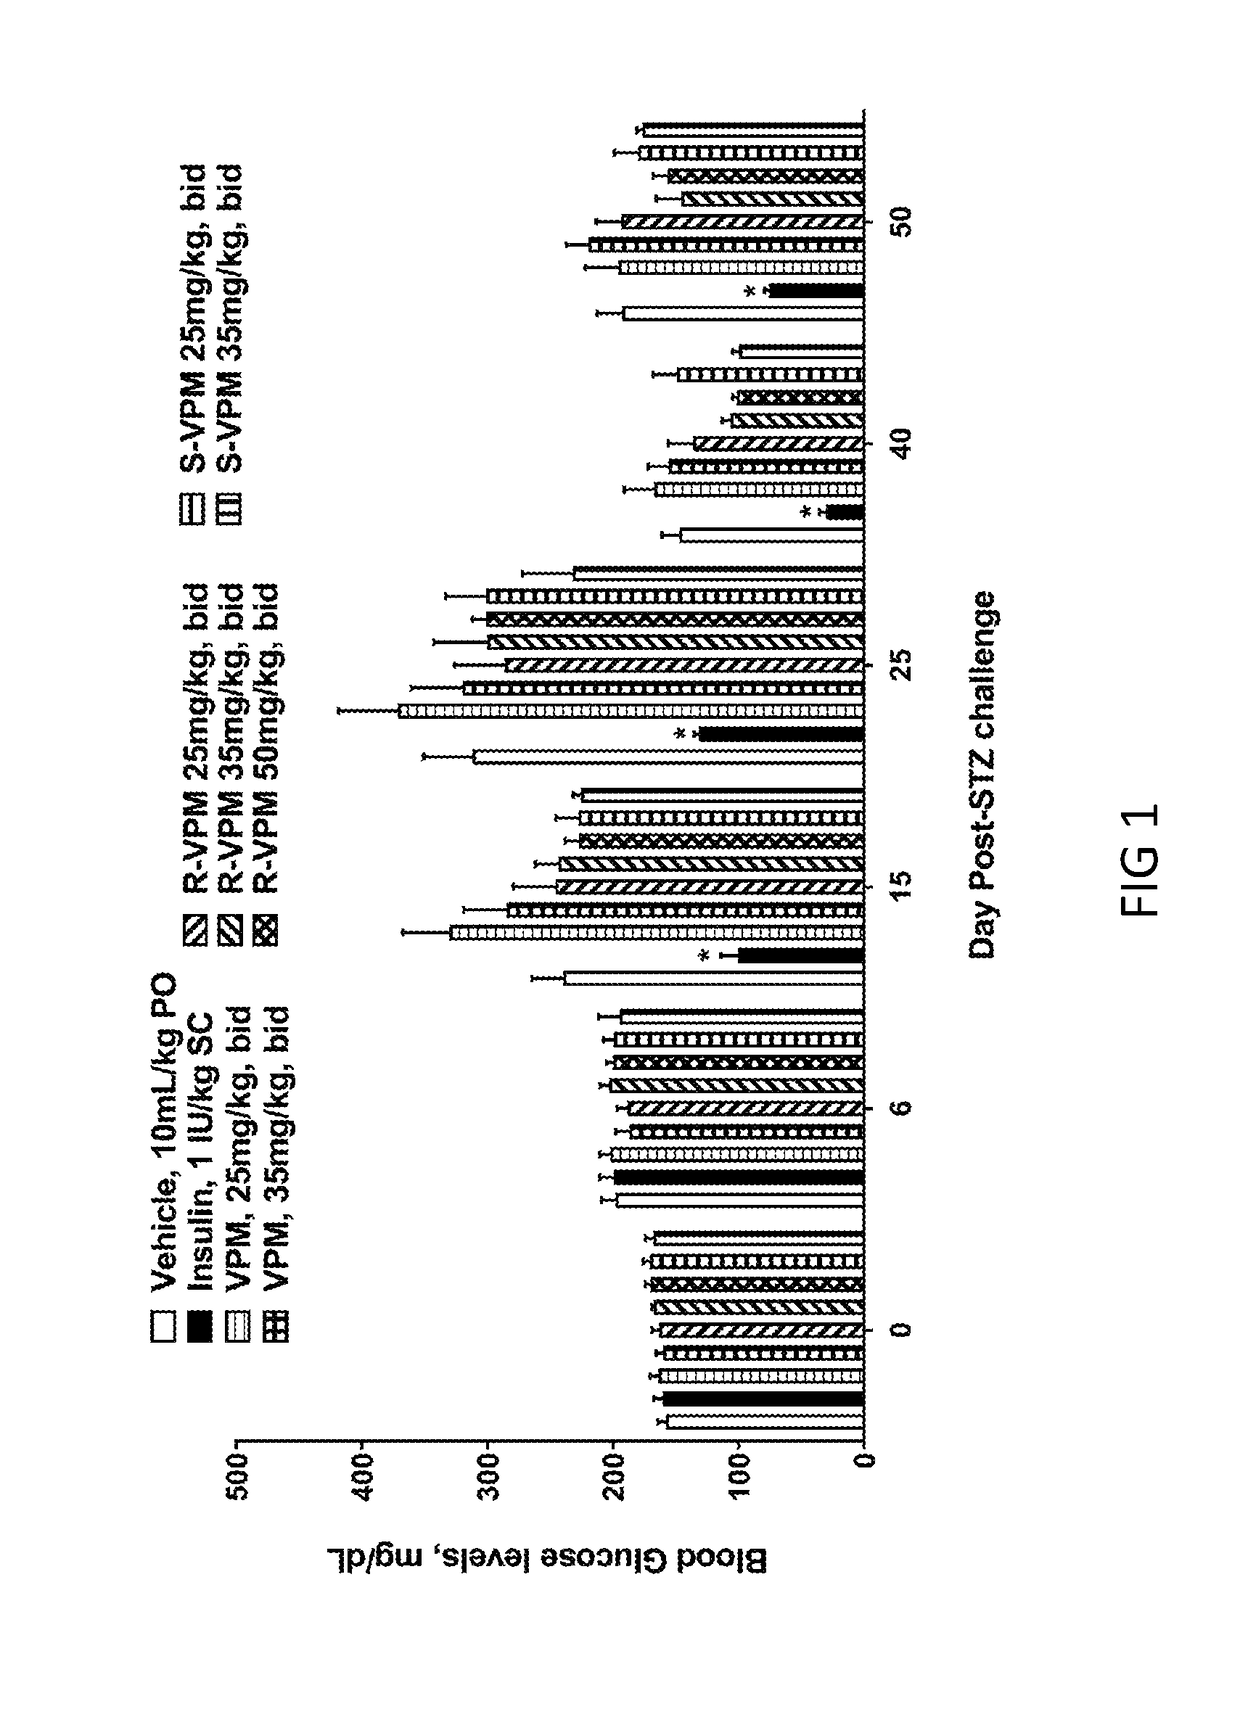 Method of treating hyperglycemia